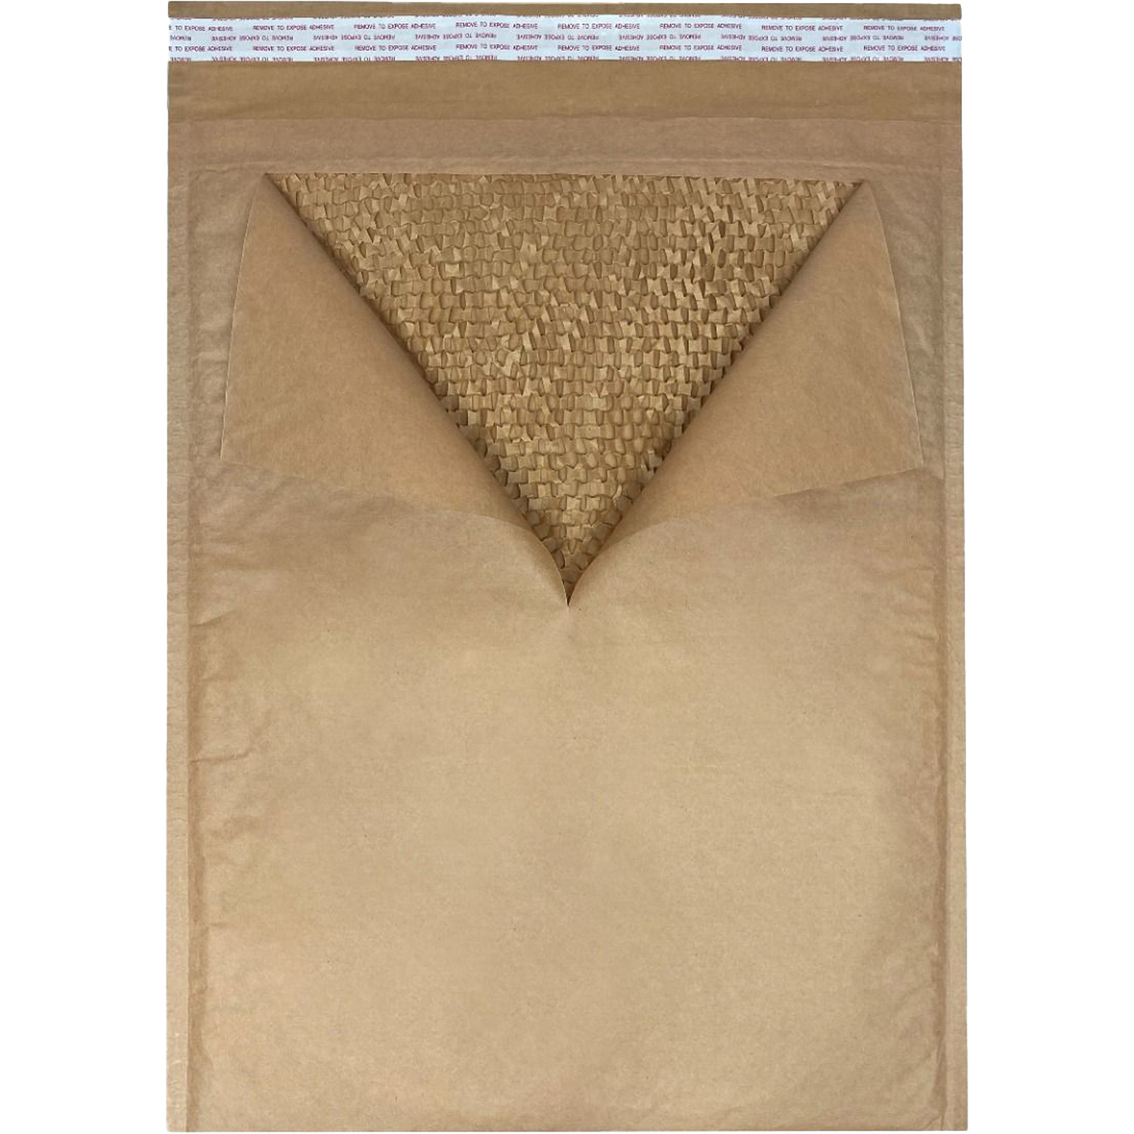 uBoxes Honeycomb Padded Shipping Envelope #7 14.25 x 19 in. Pack of 30 - Image 2 of 4